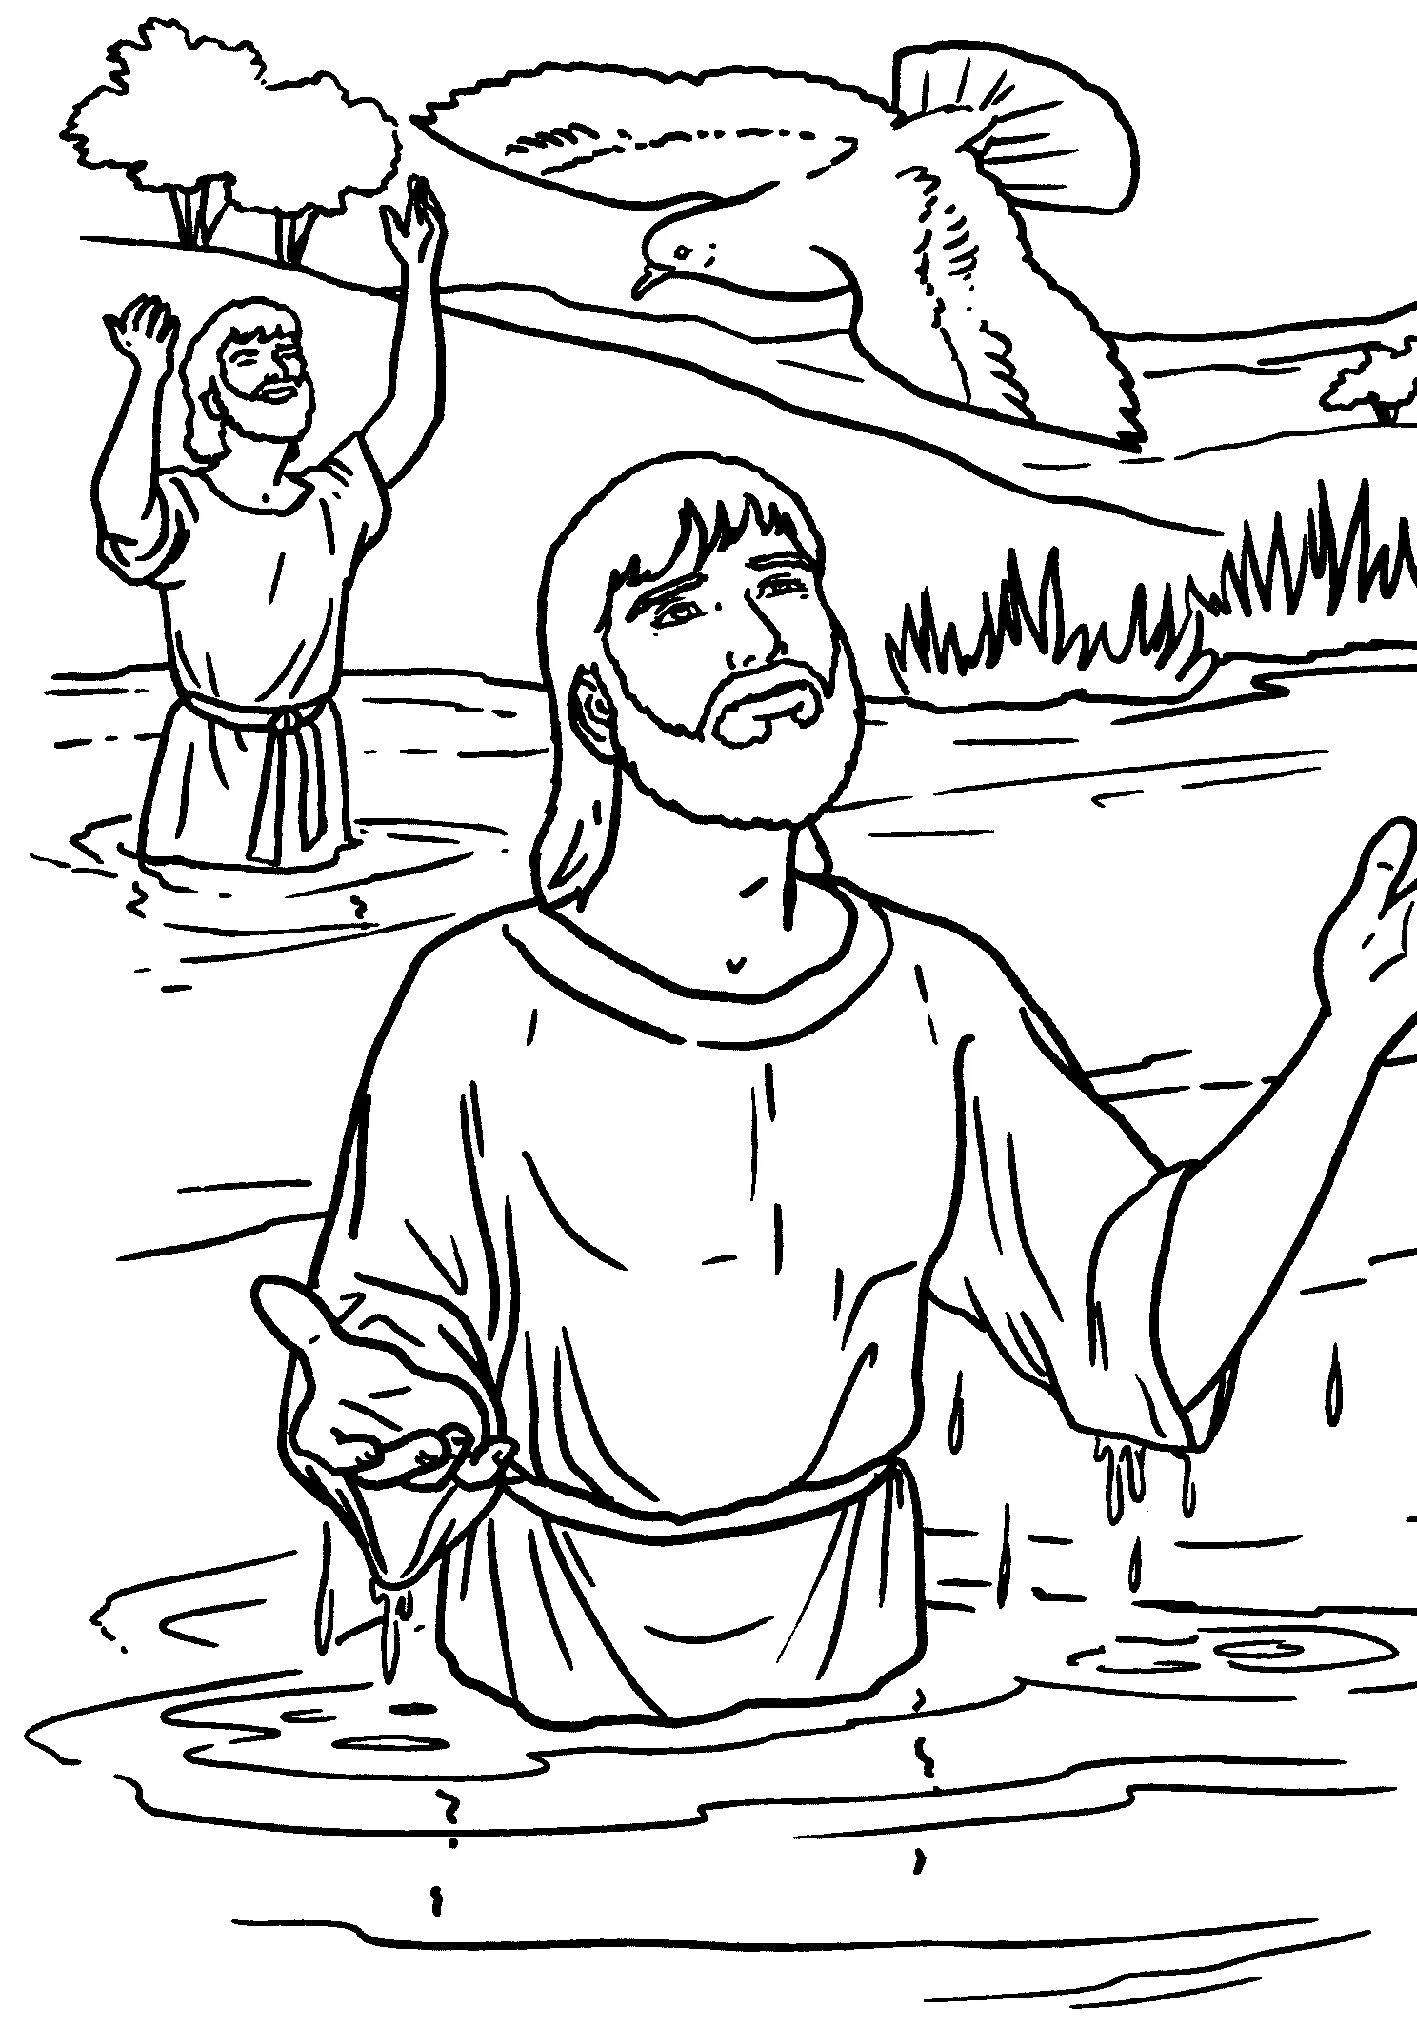 On the topic of the Baptism of the Lord #6